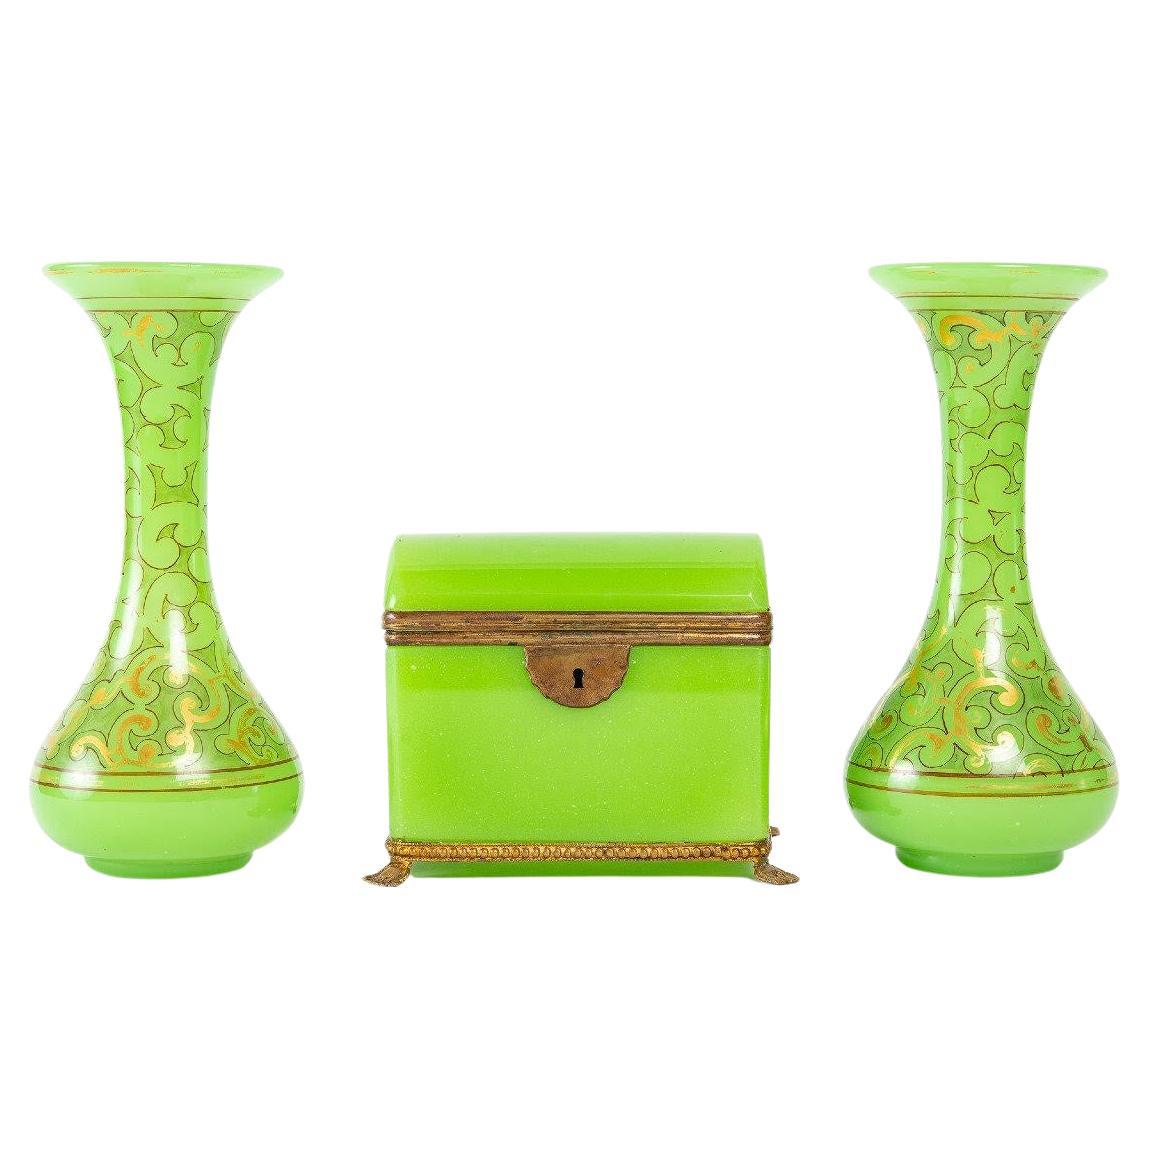 Pair of 19th Century Green Opaline Enameled Vases and Box